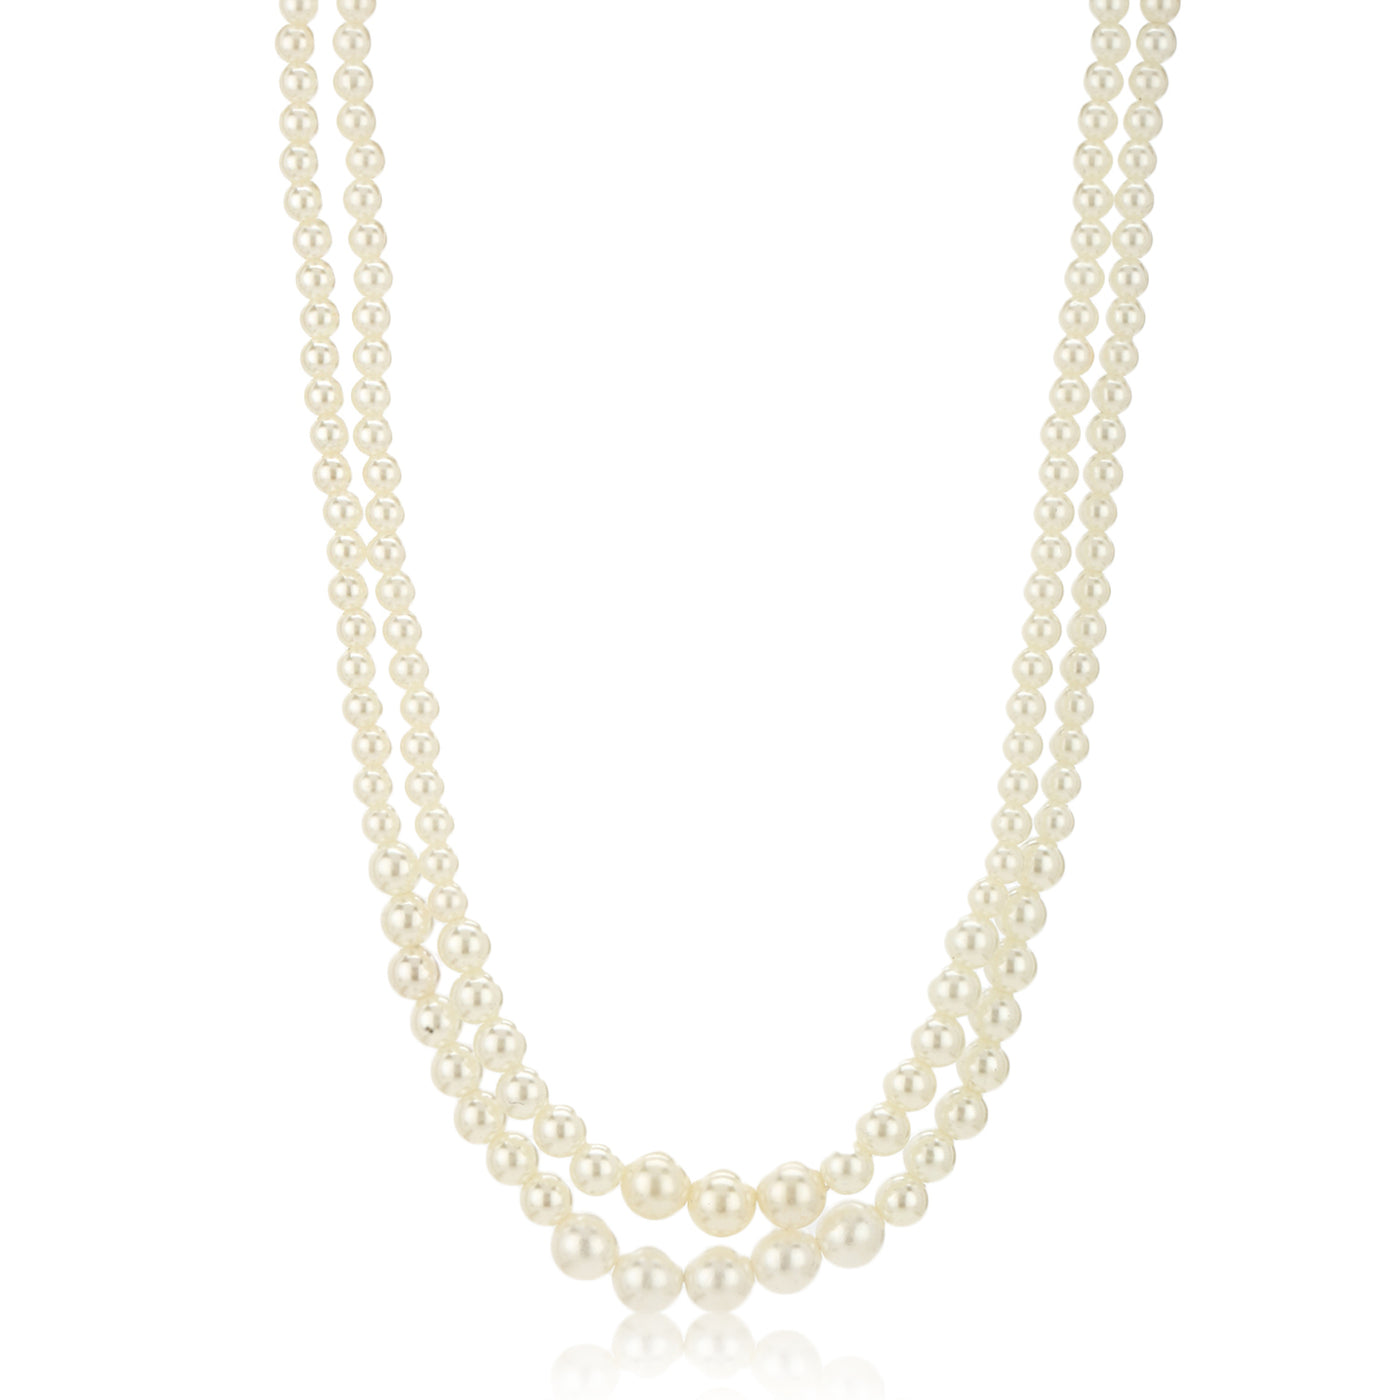 Double line White Pearl Necklace